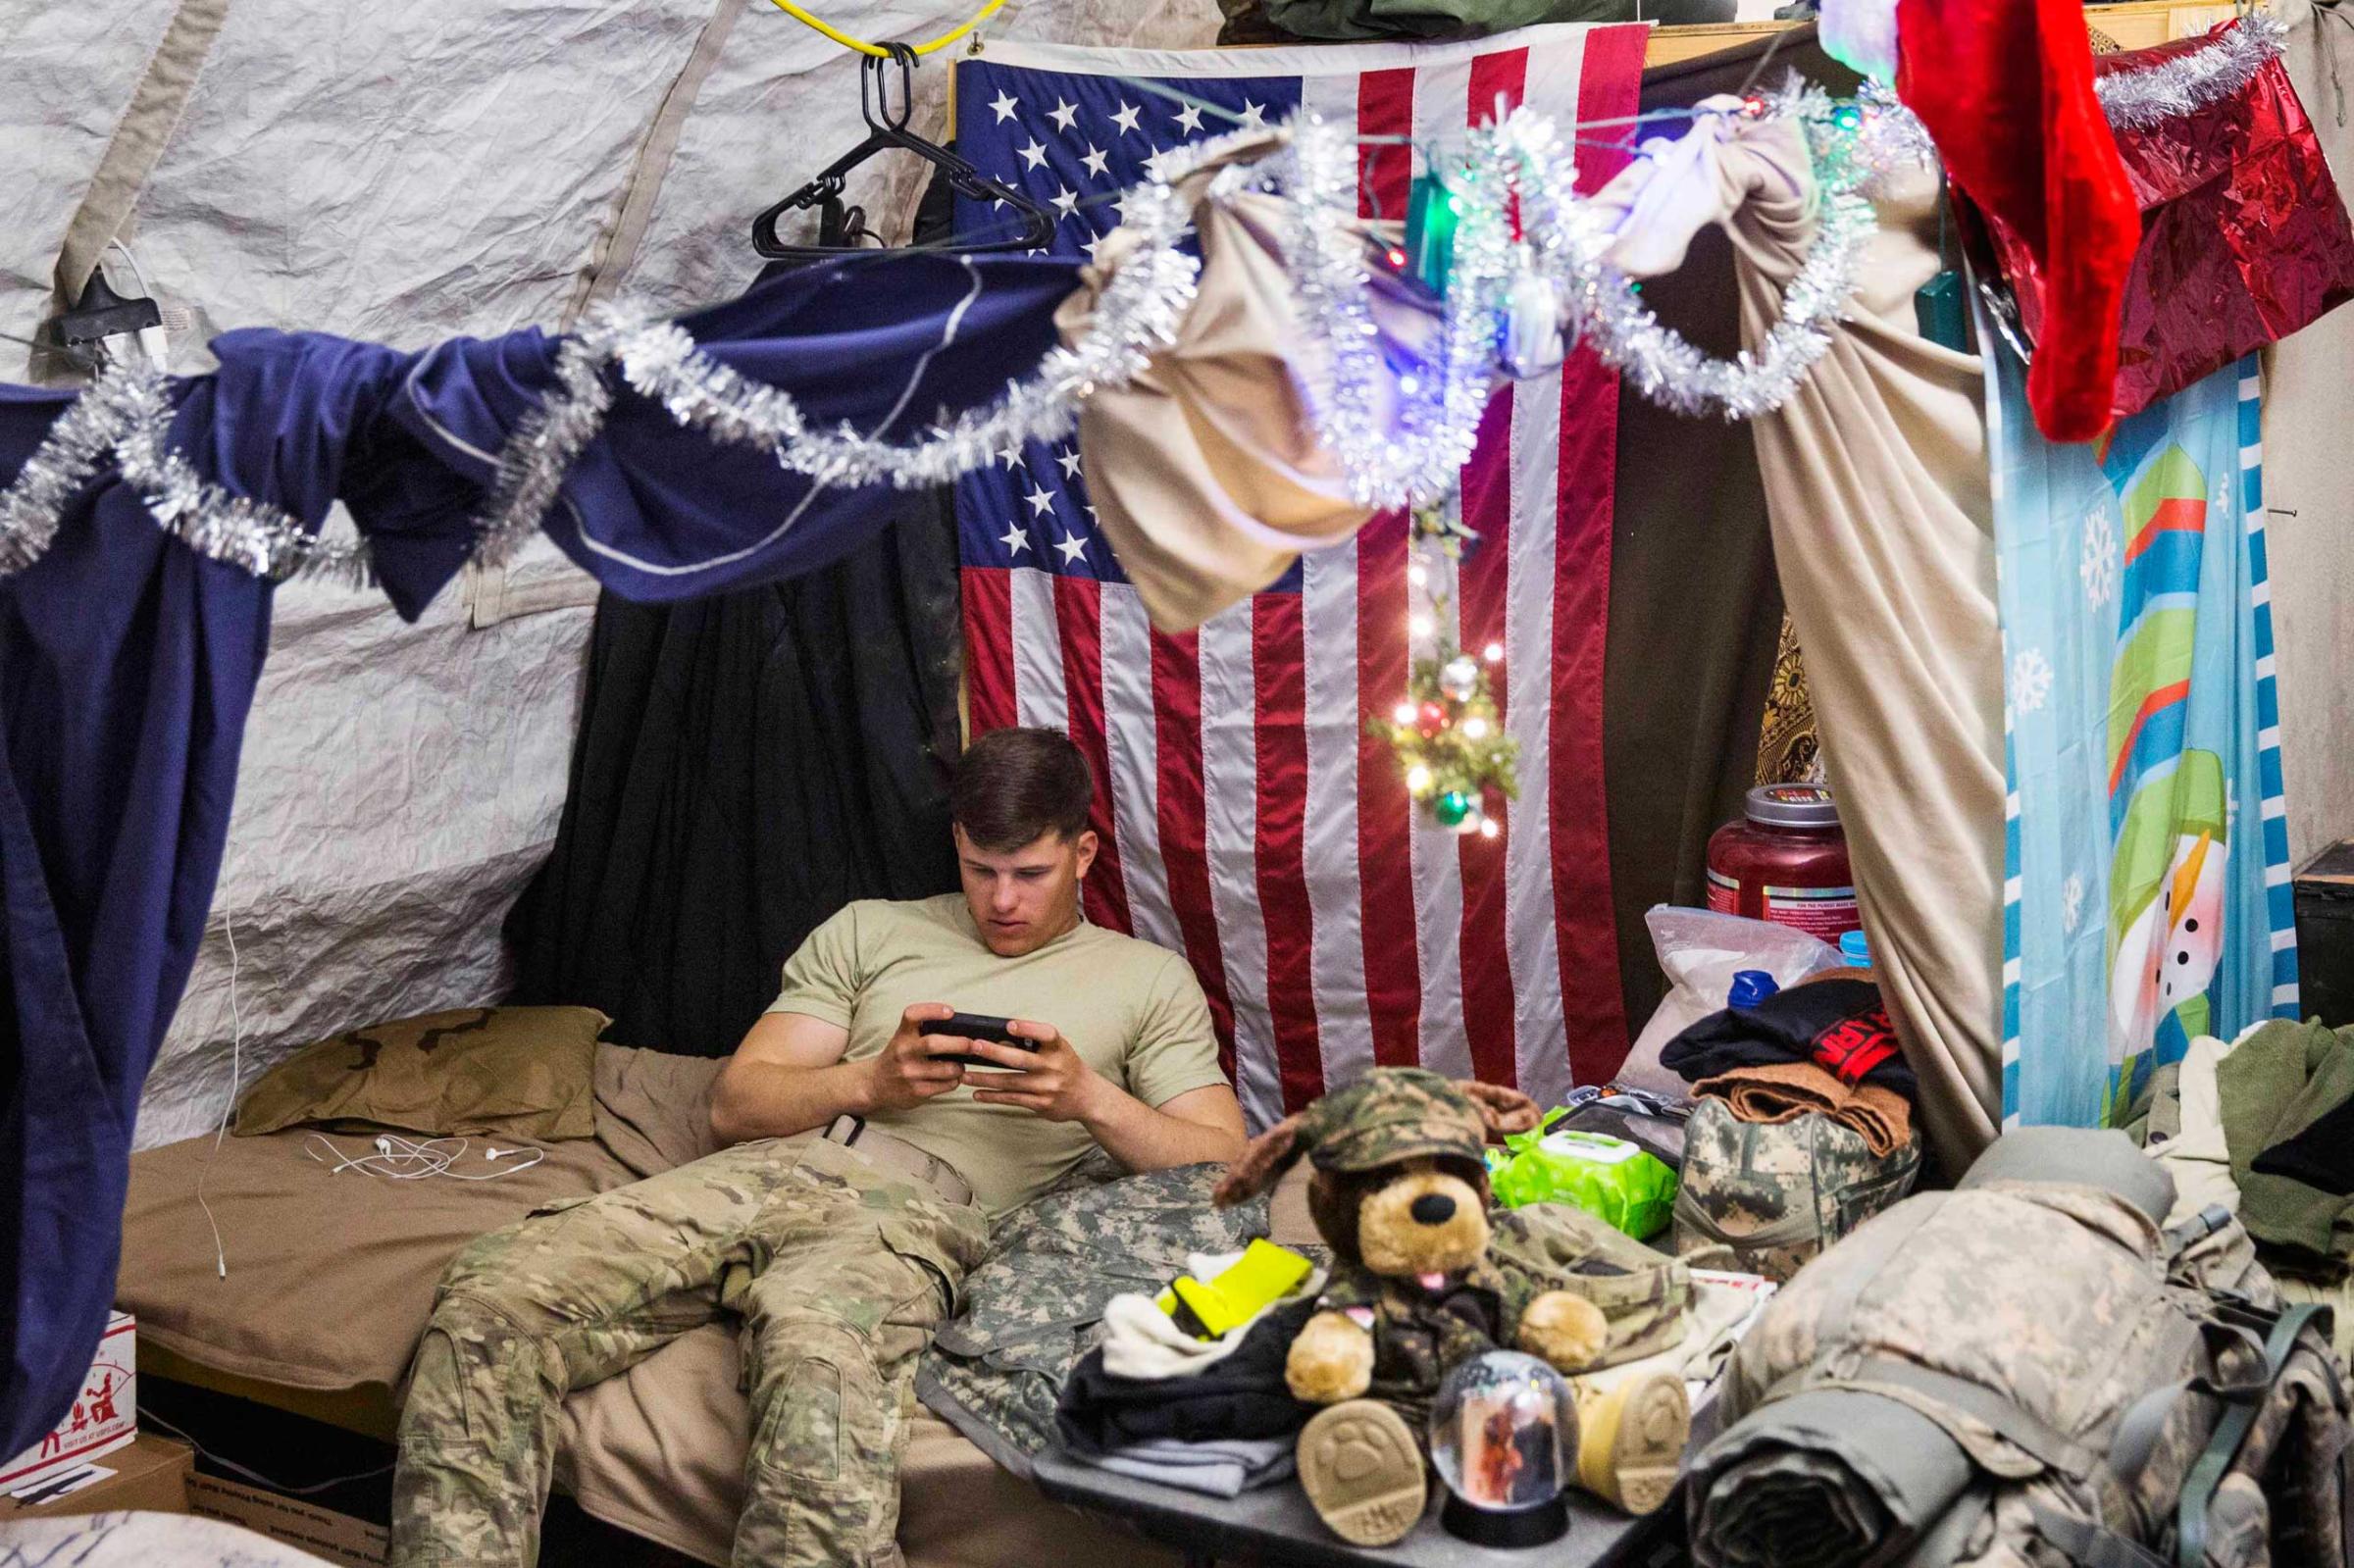 U.S. soldier from the 3rd Cavalry Regiment relaxes in his quarters after taking part in a mortar exercise on forward operating base Gamberi in the Laghman province of Afghanistan